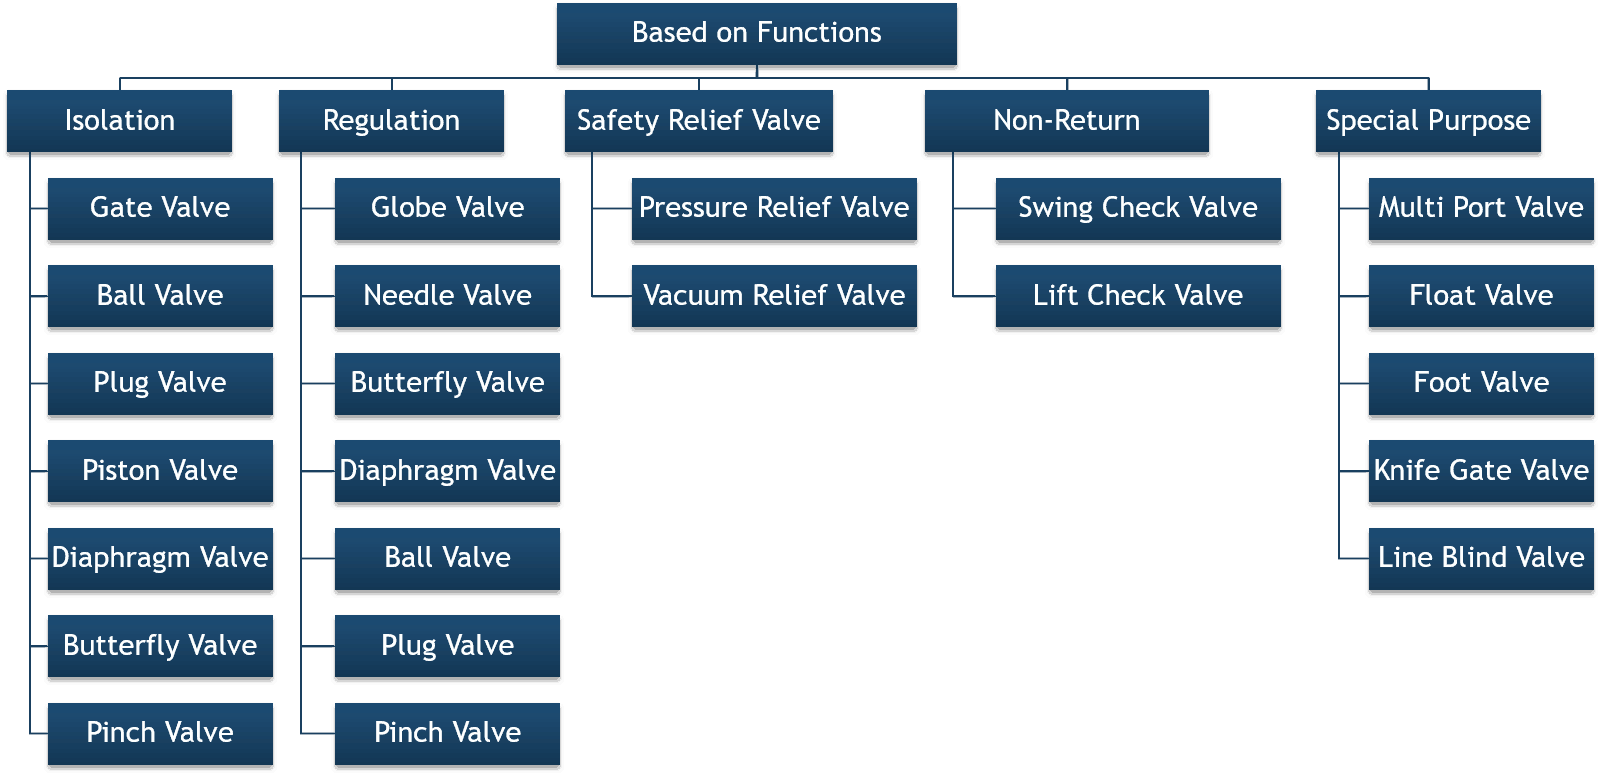 https://hardhatengineer.com/wp-content/uploads/2018/06/types-of-valves-and-their-functions-1.png